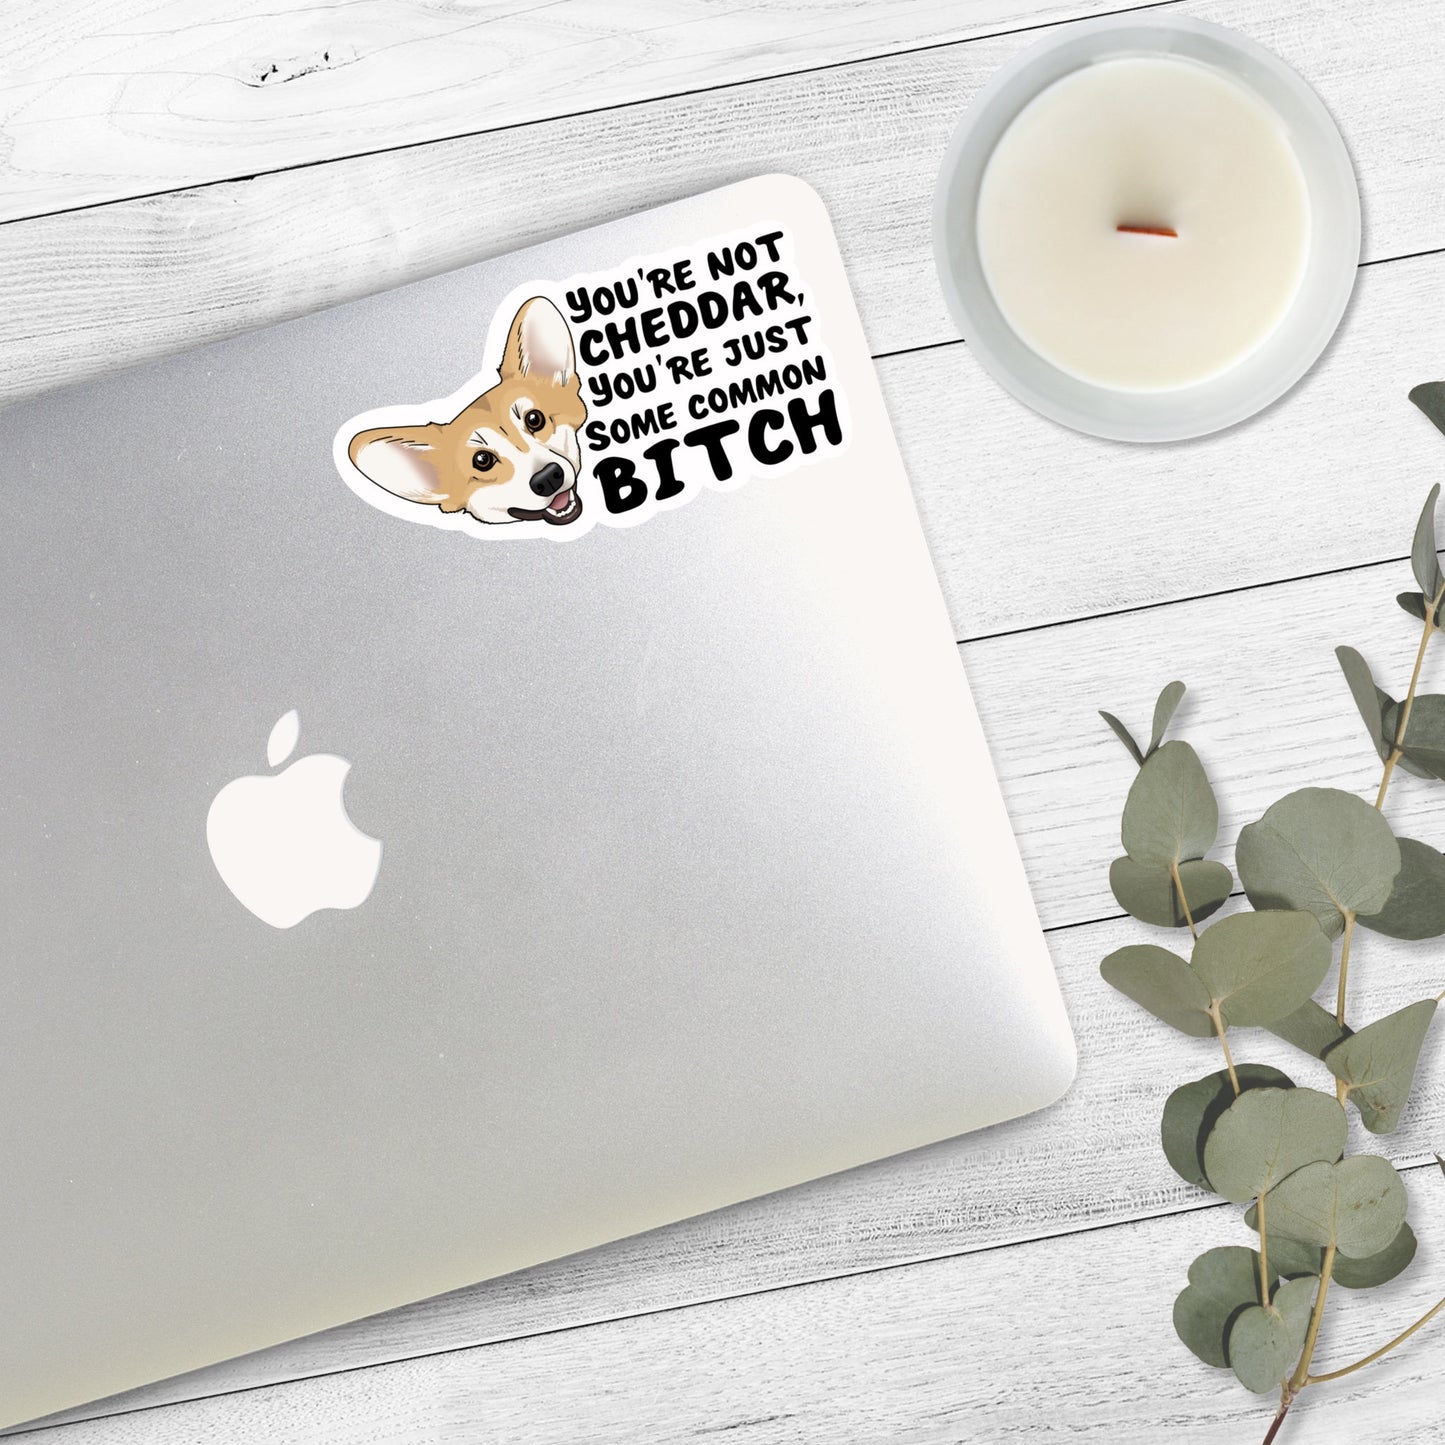 You're Not Cheddar, You're Some Common Bitch | Captain Raymond Holt | Brooklyn 99 Stickers